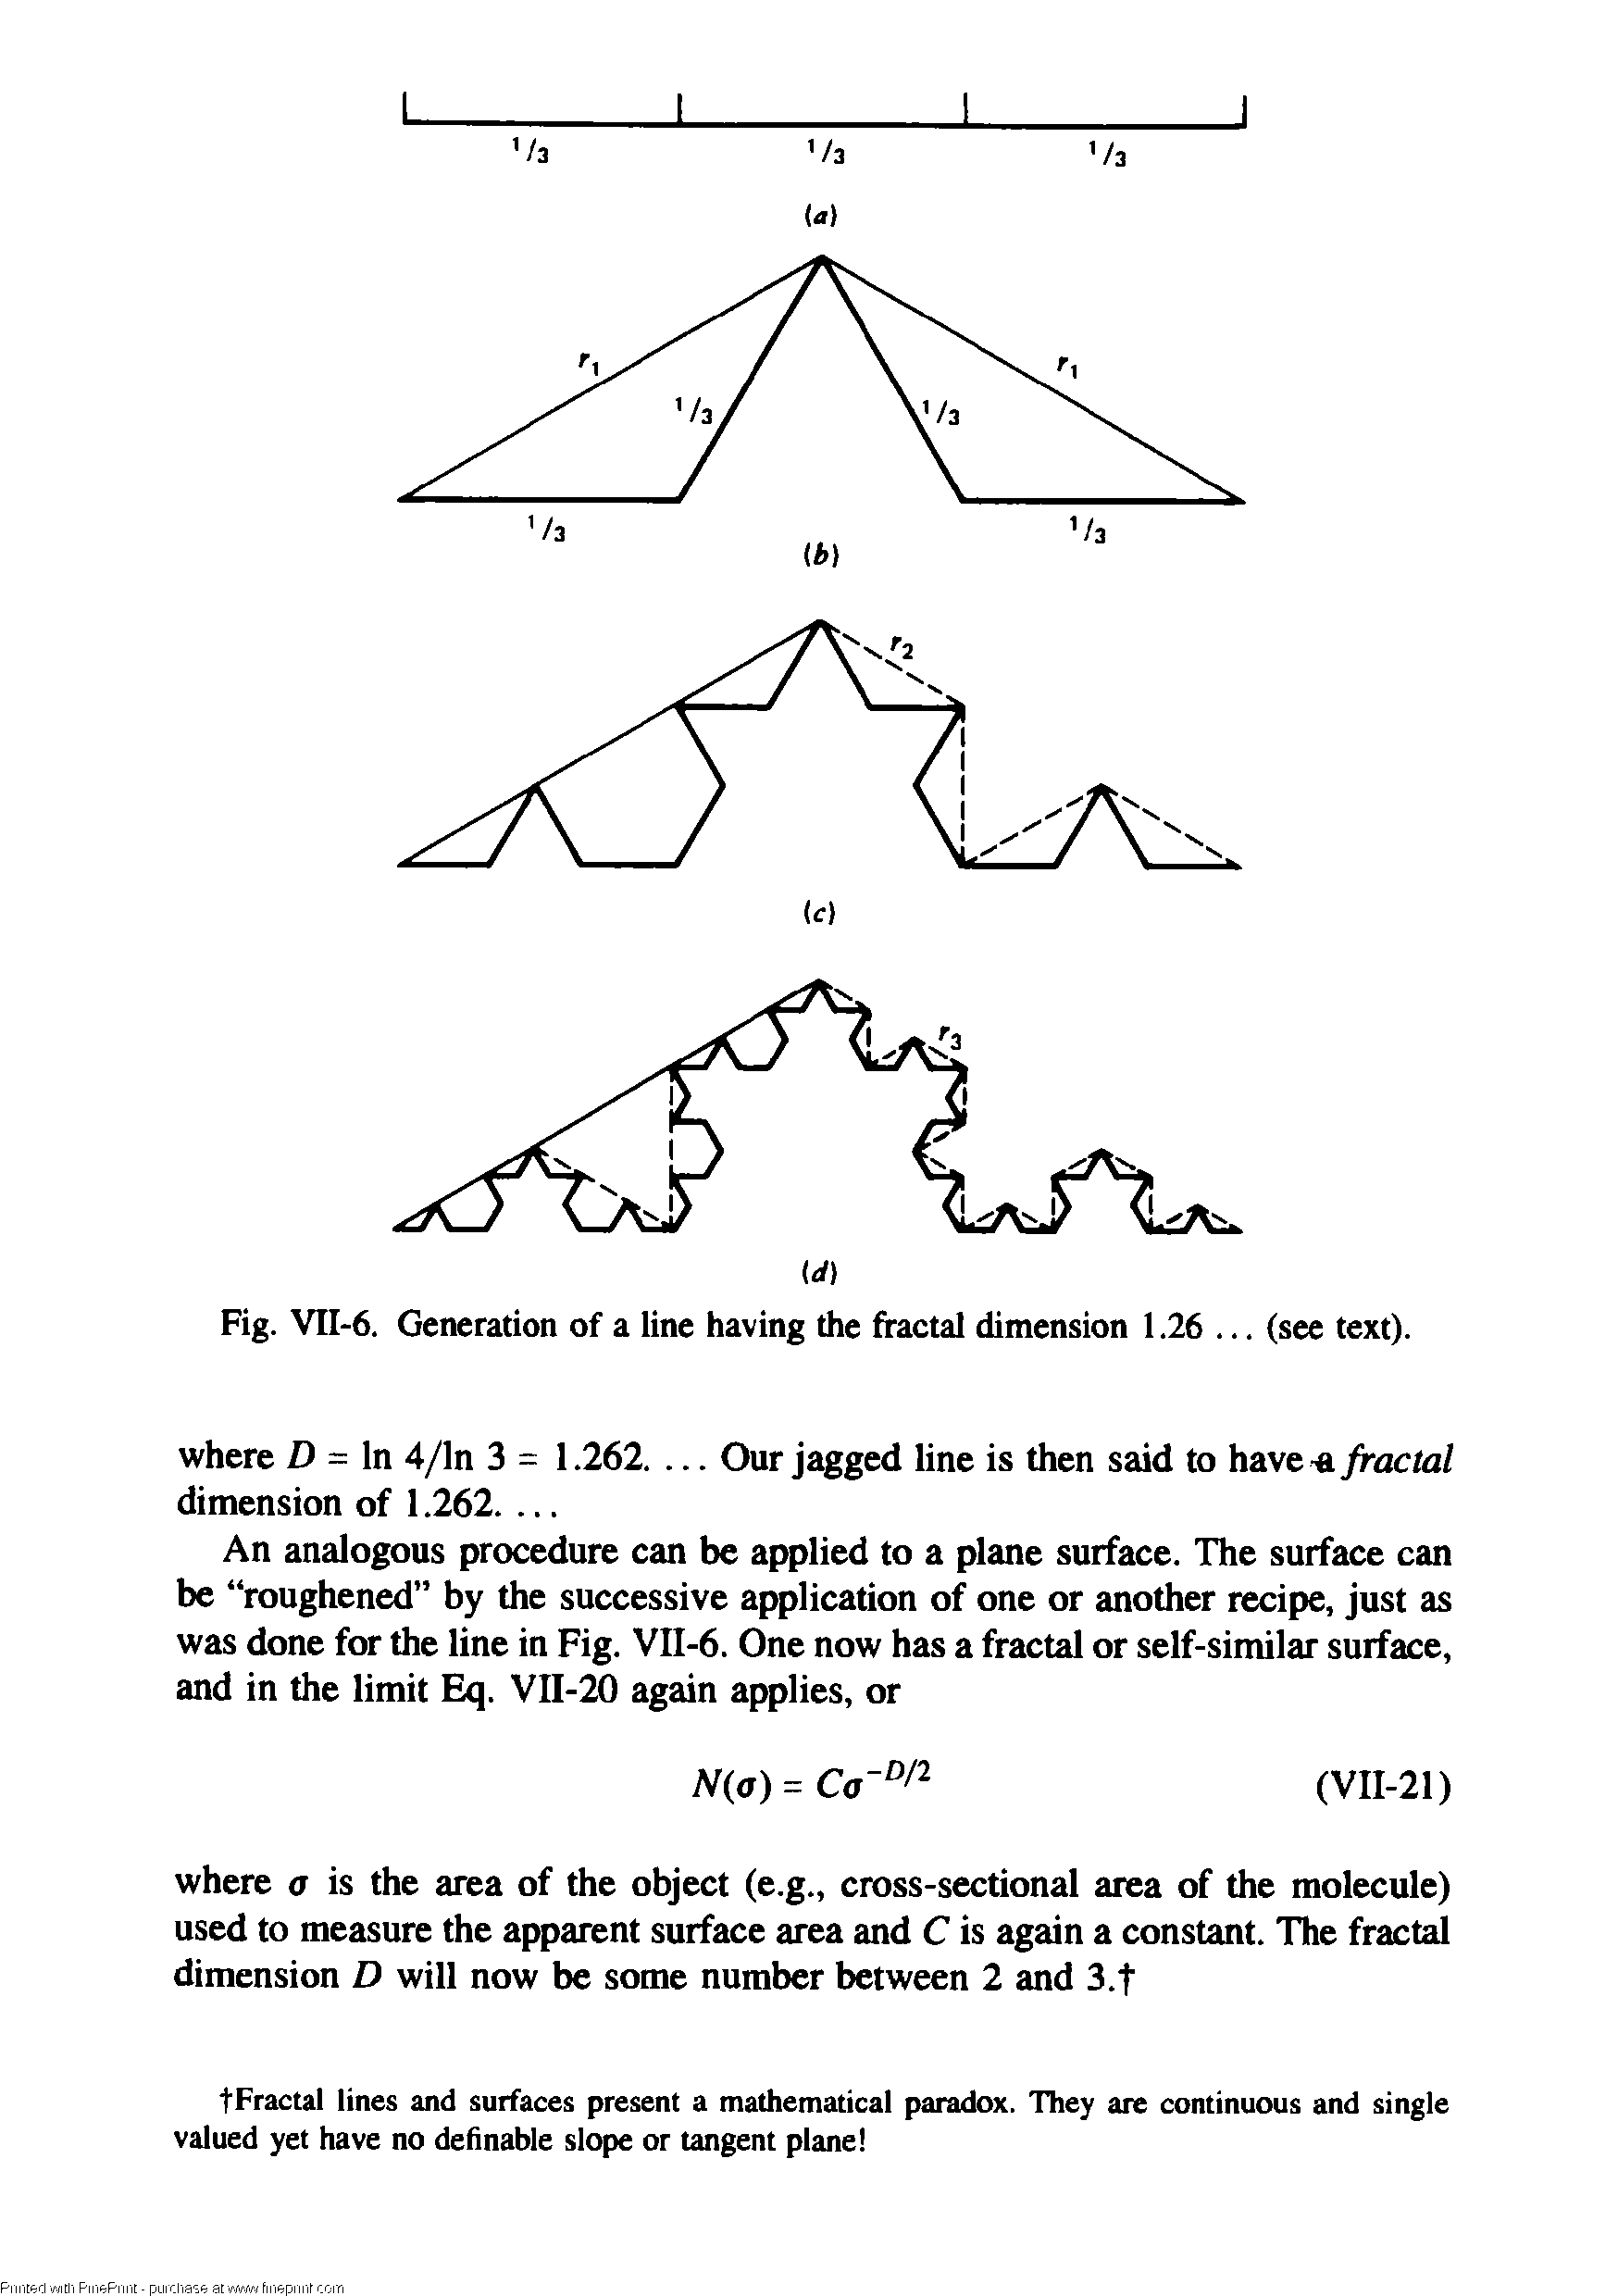 Fig. VII-6. Generation of a line having the fractal dimension 1.26. .. (see text).